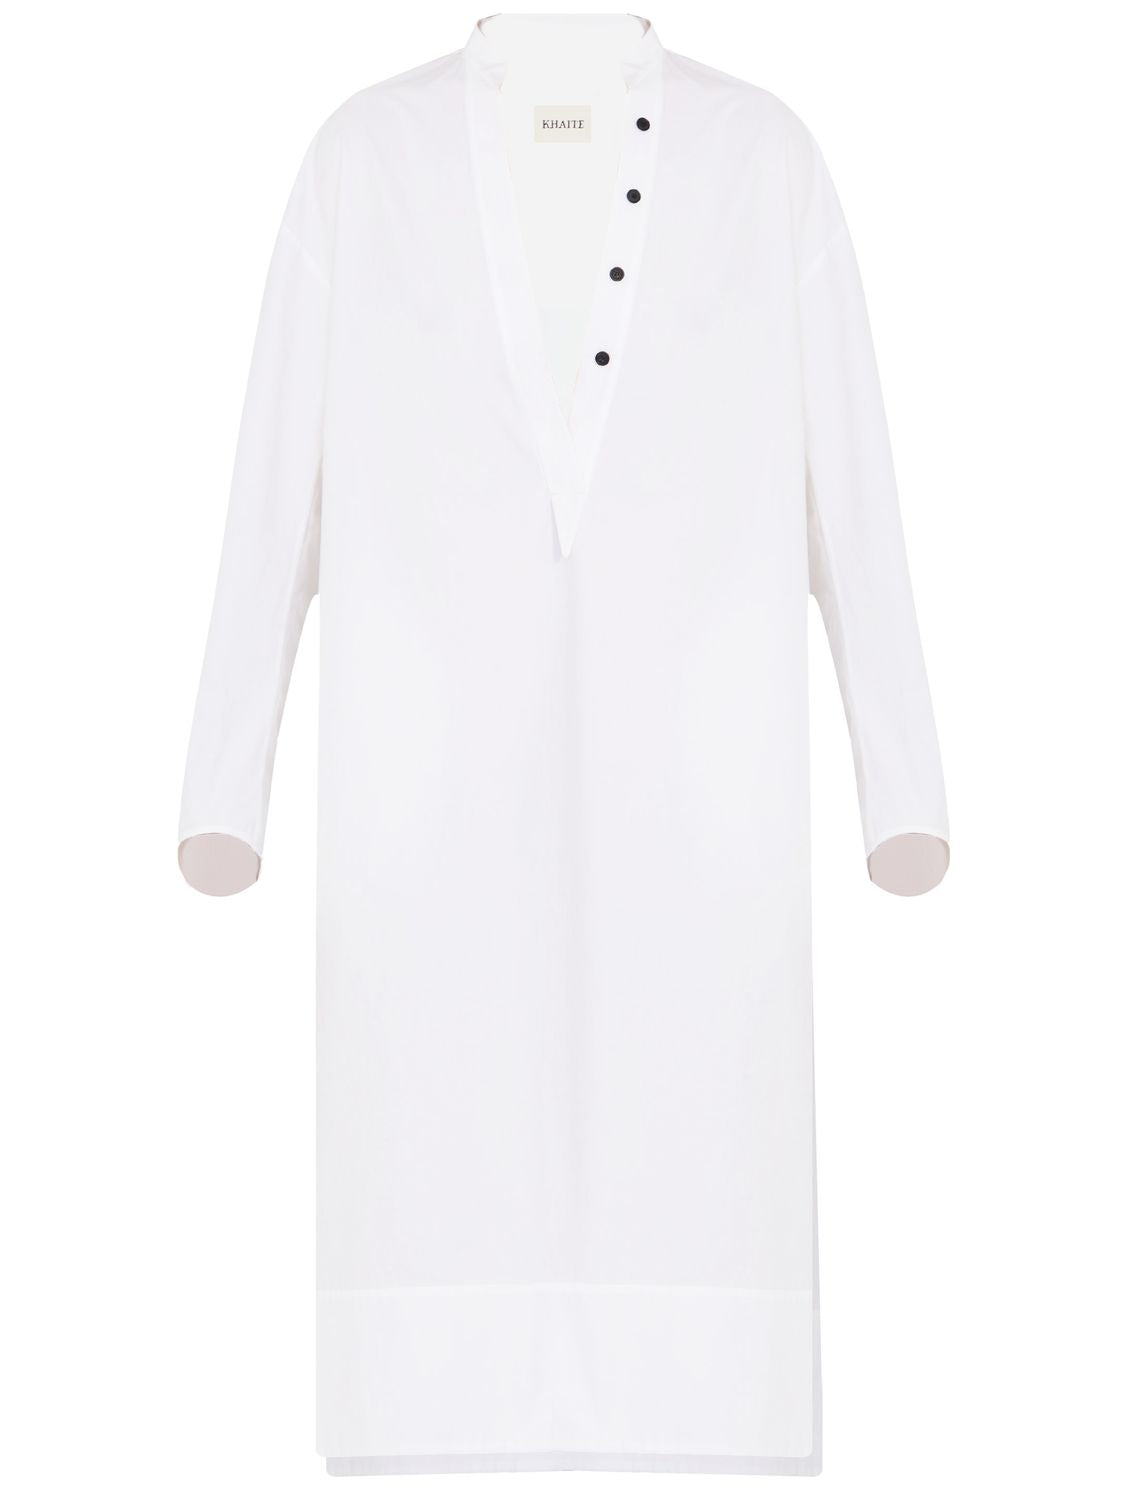 Plunging V-Neck Cotton Dress with Button Detailing